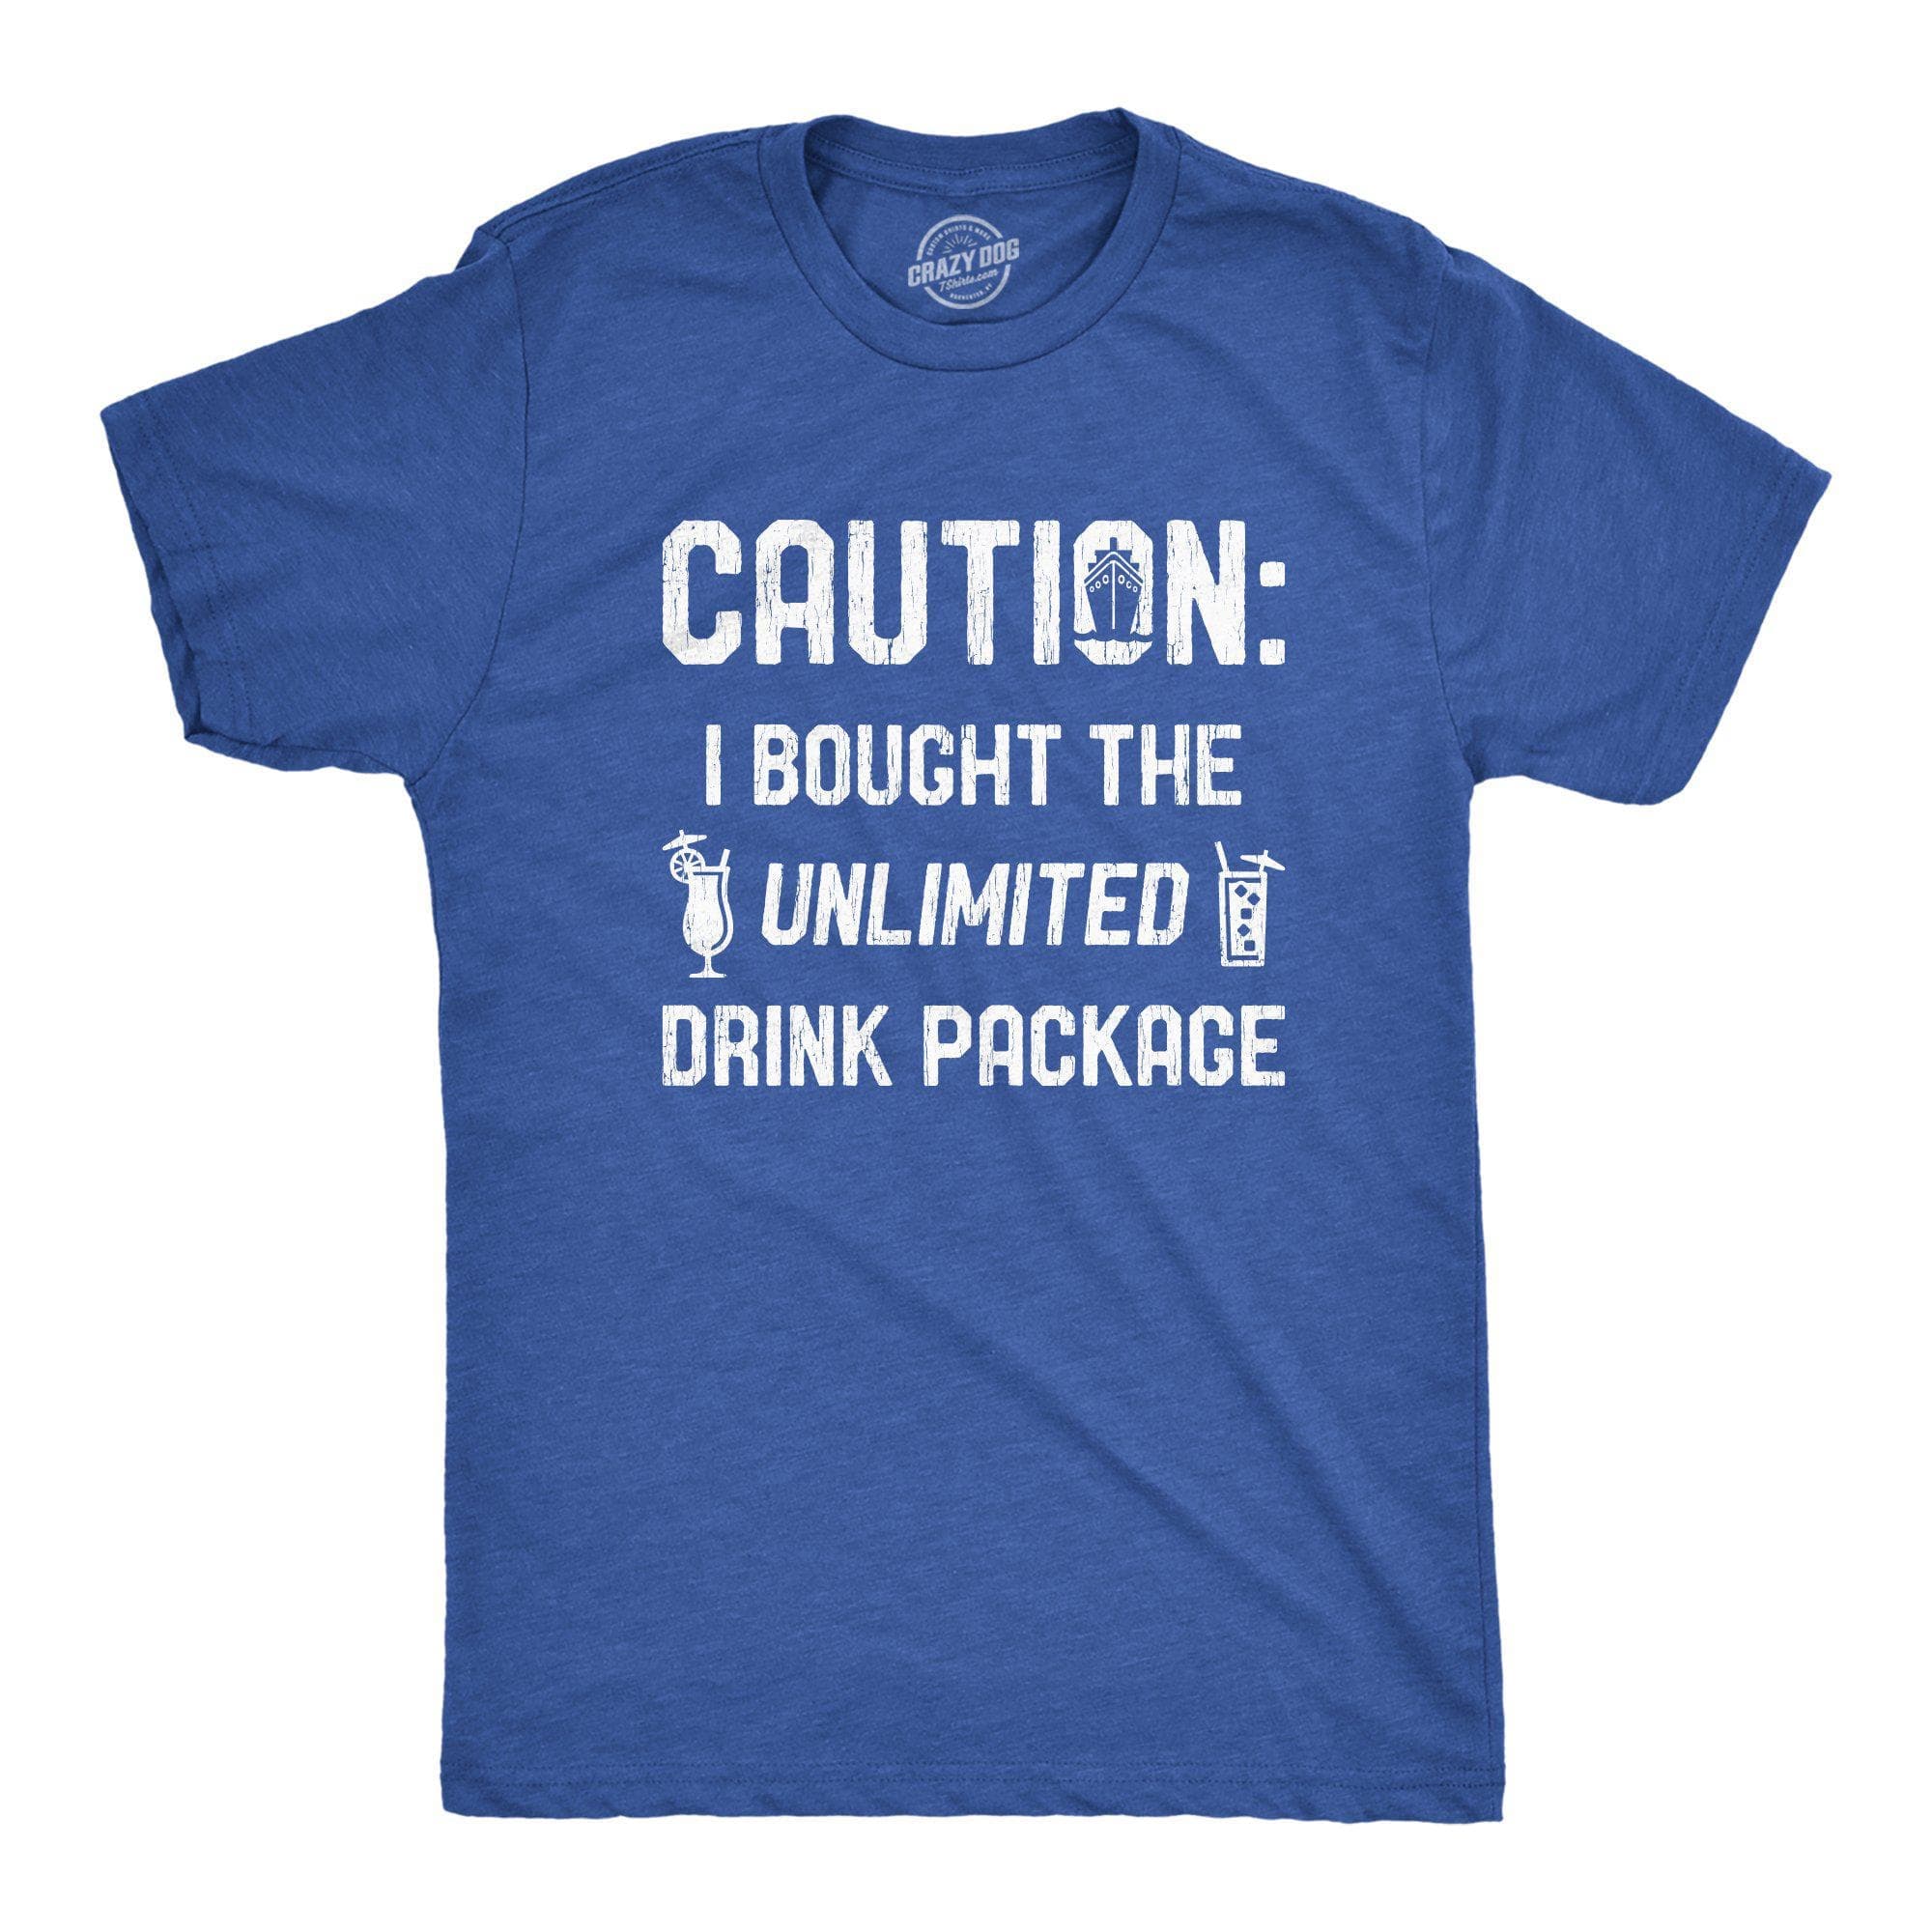 Caution I Bought The Unlimited Drink Package Men's Tshirt - Crazy Dog T-Shirts